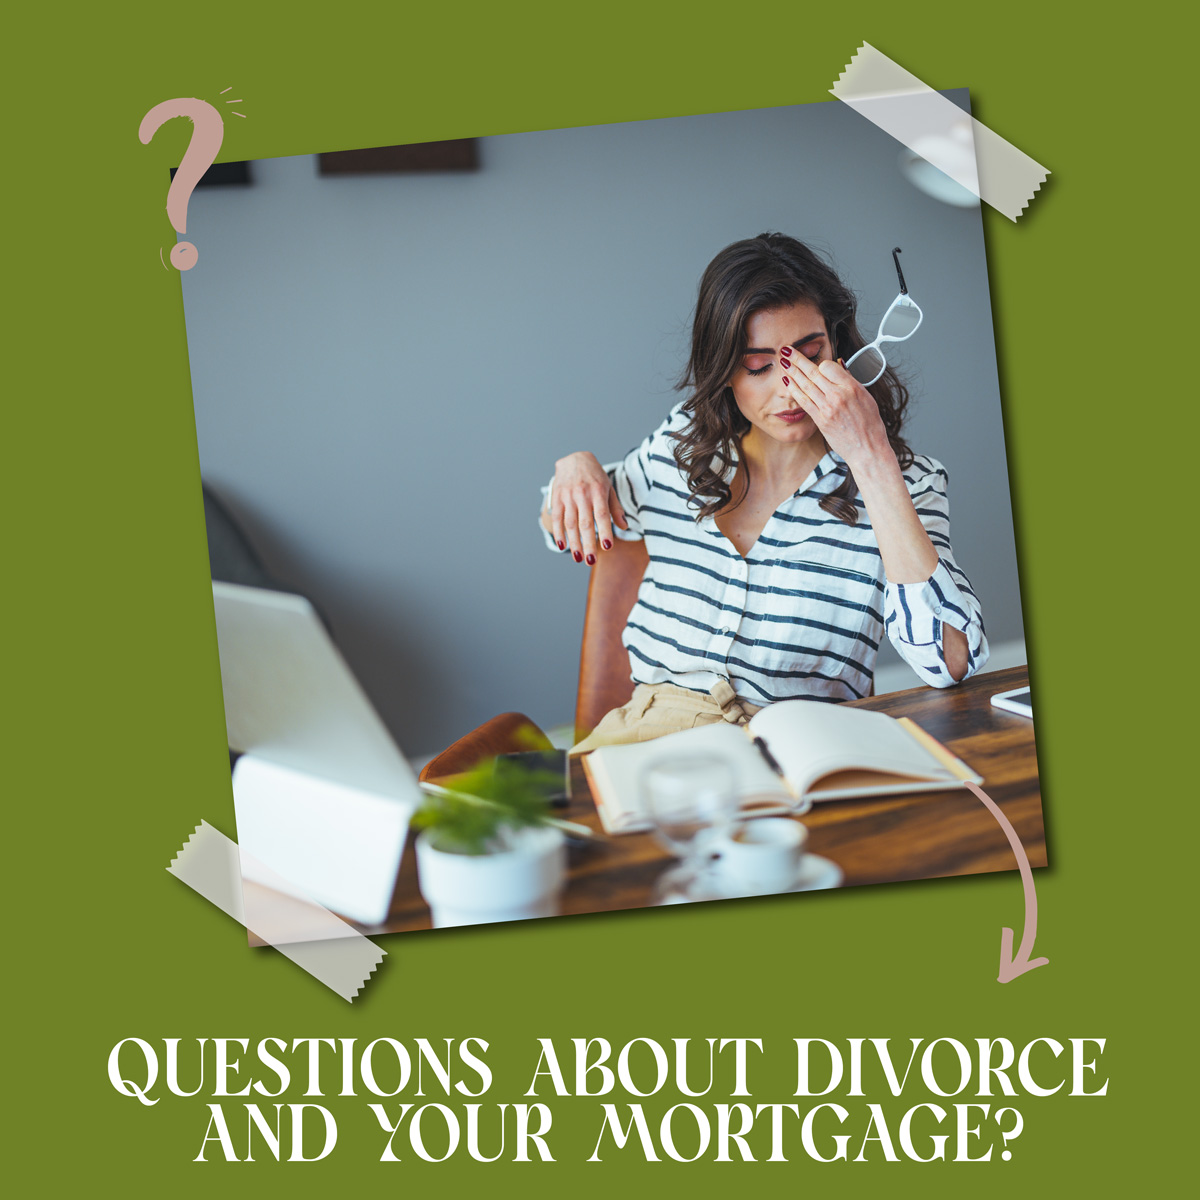 Start the next chapter of your life without a hitch. If you have questions about divorce and your mortgage, call us today — we’re here to help. DM me to get started. #designhomeloans #deliveringmore